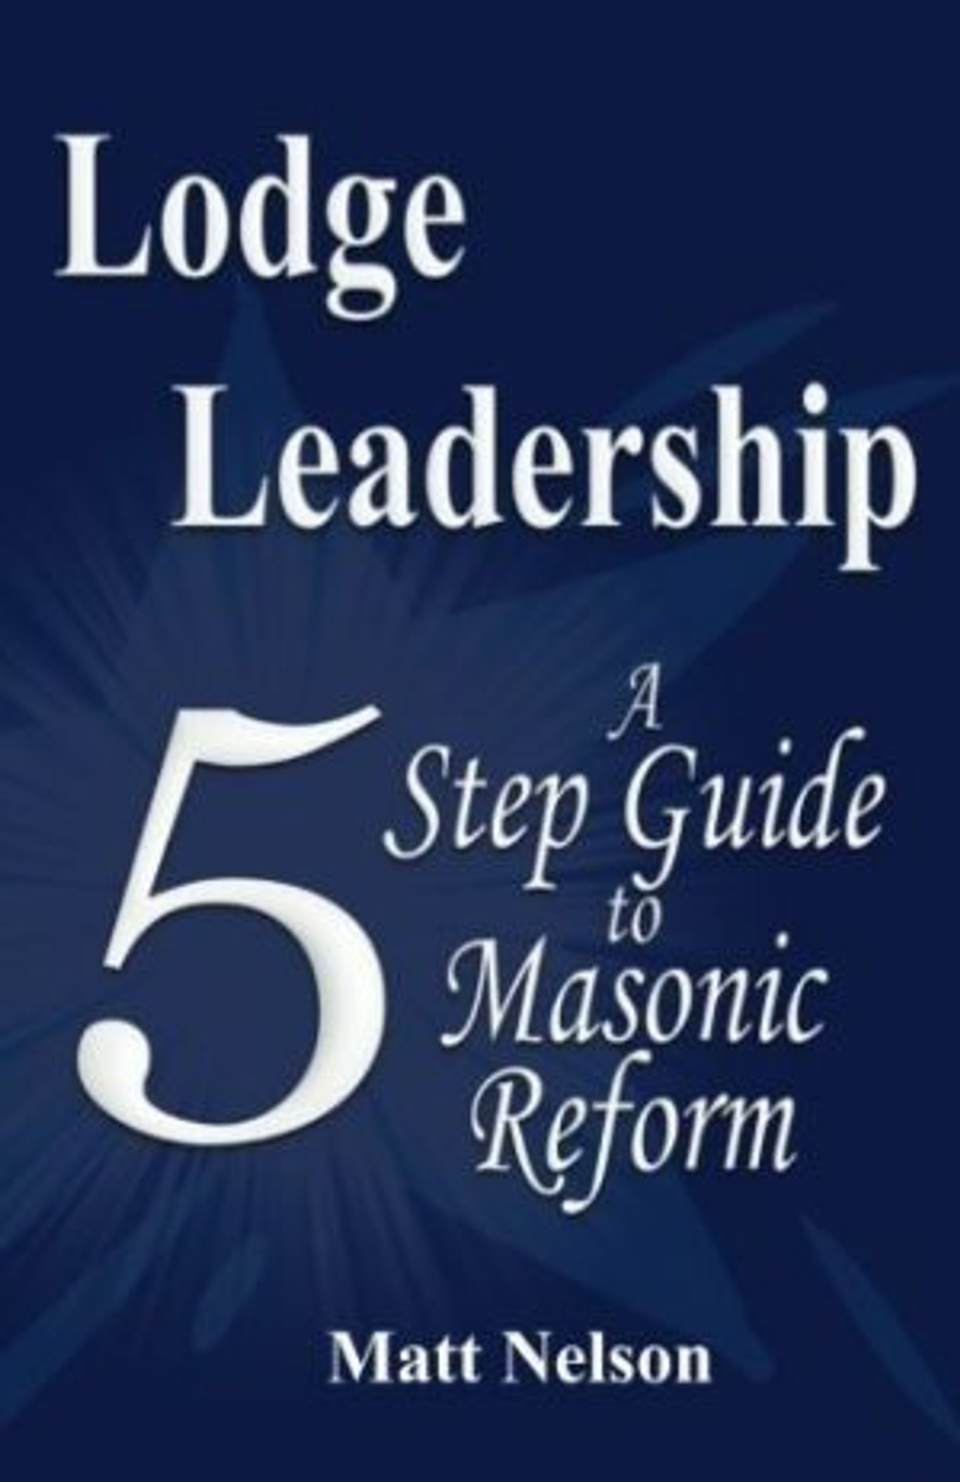 Lodge Leadership: A Five Step Guide to Masonic Reform book by Matt Nelson